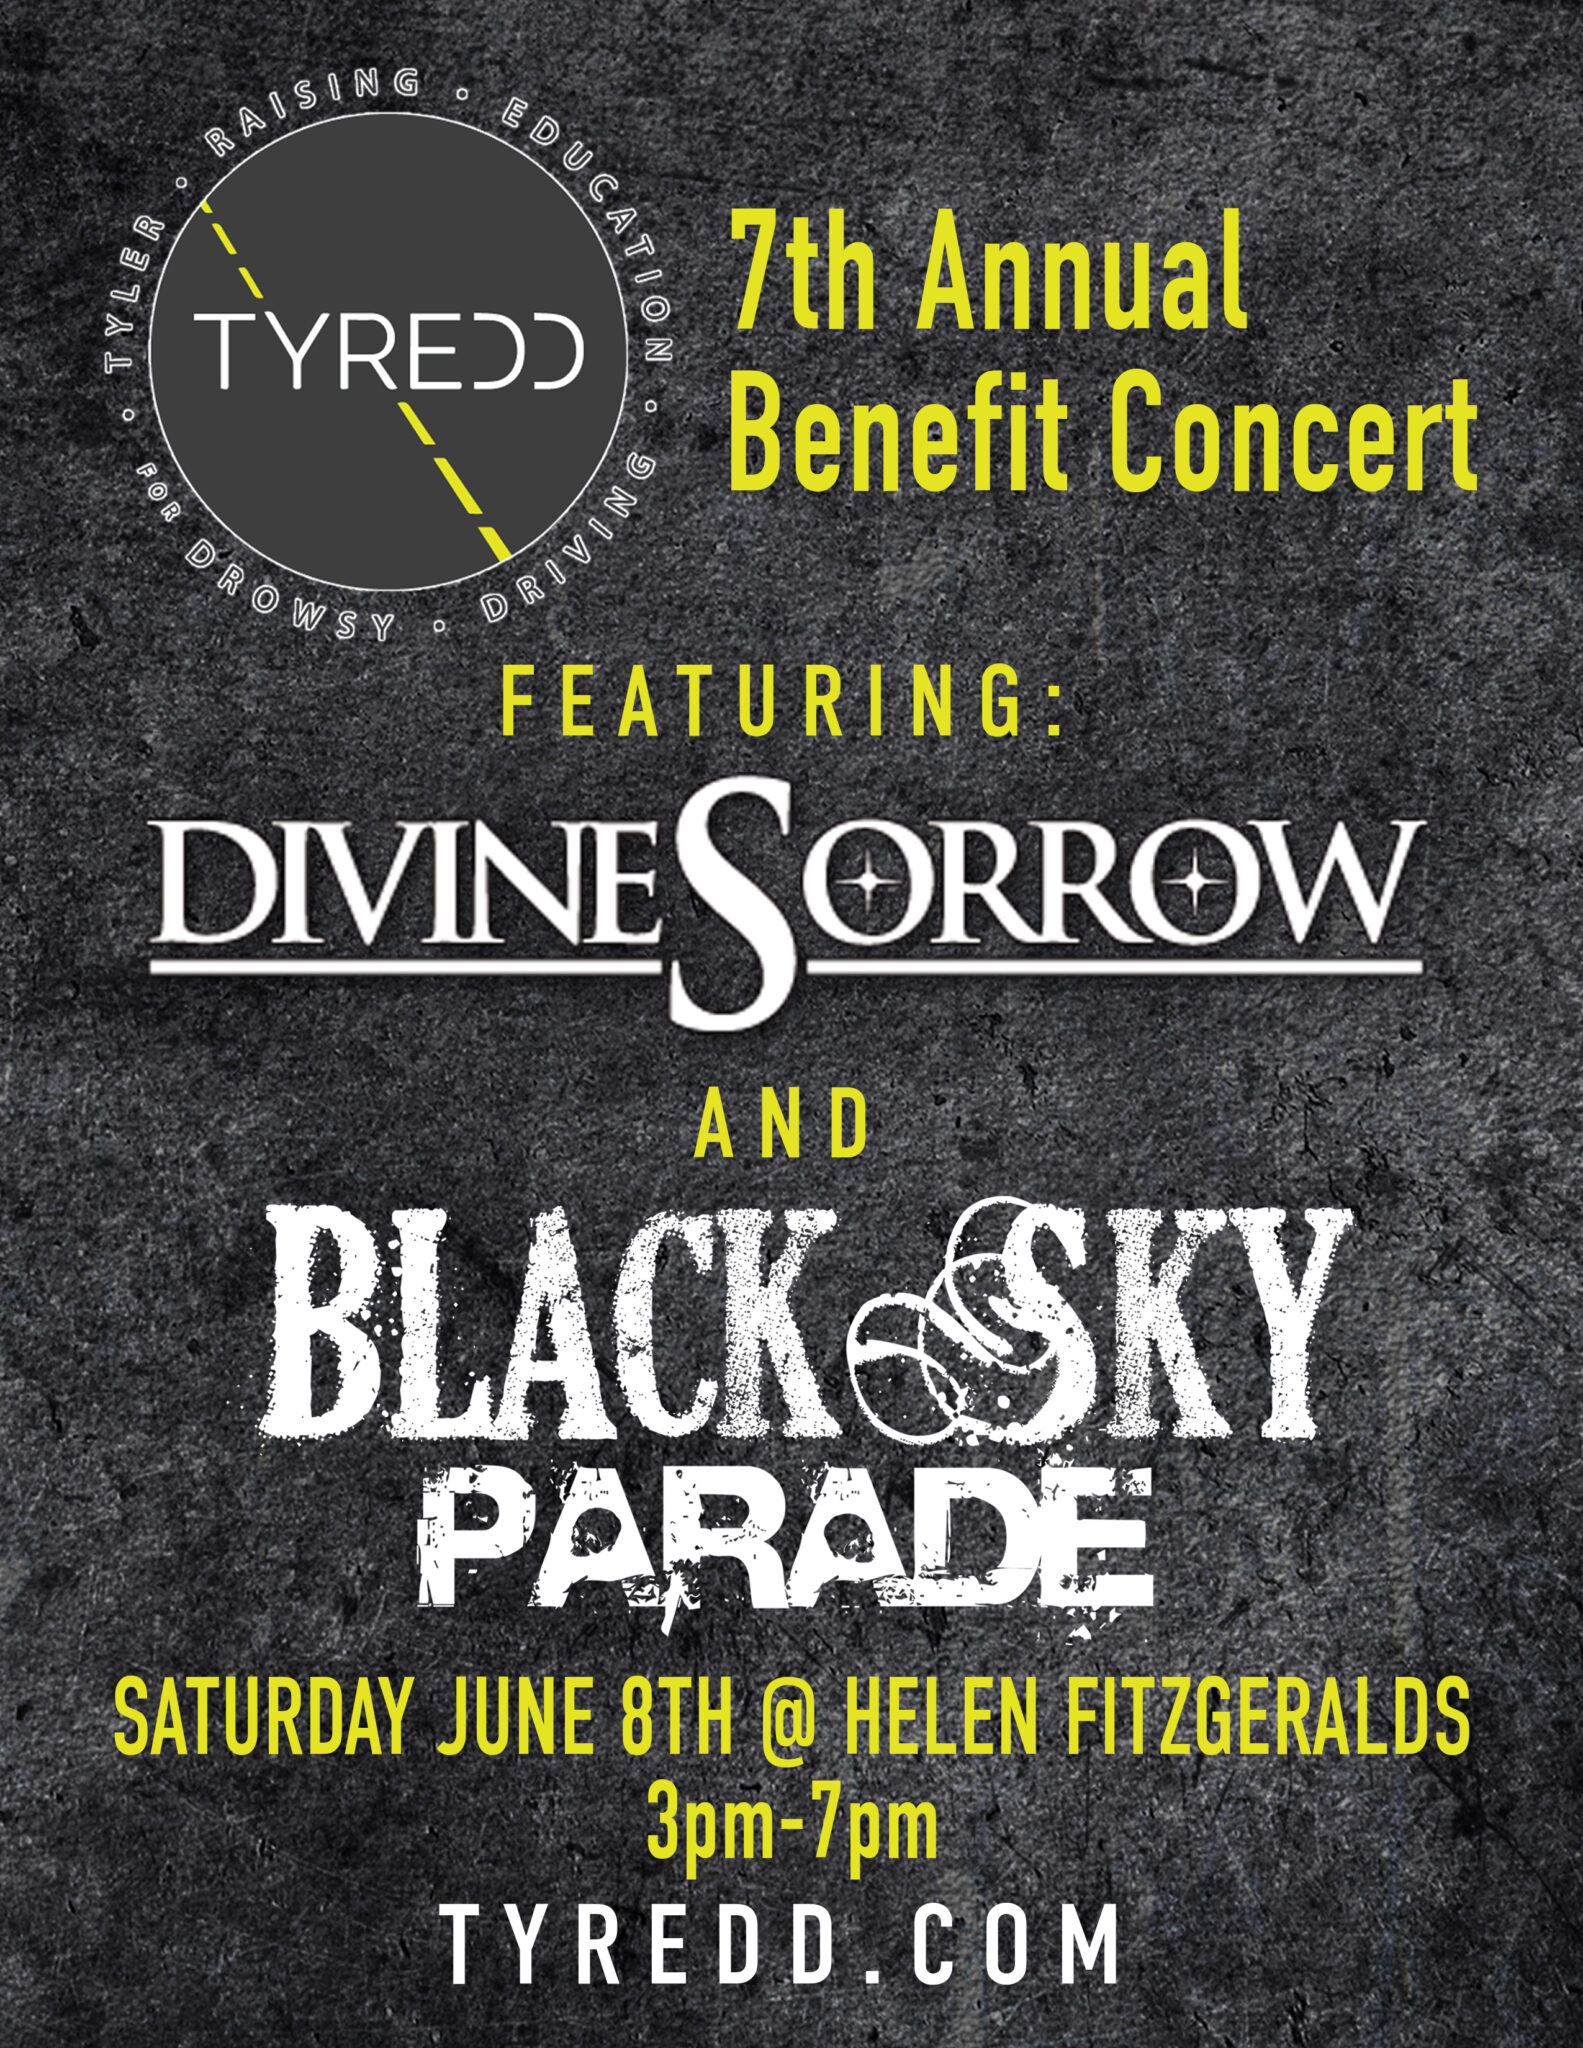 7th Annual Benefit Concert